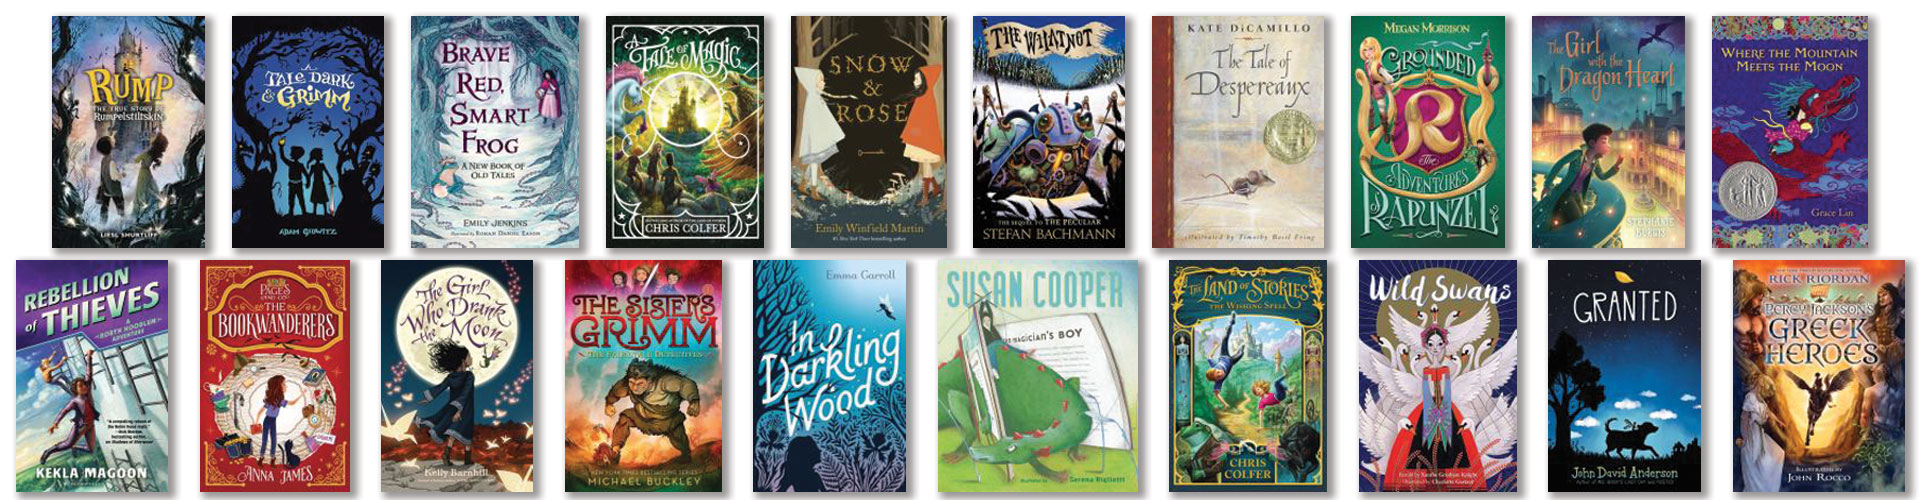 Fantastical Fiction books for young readers